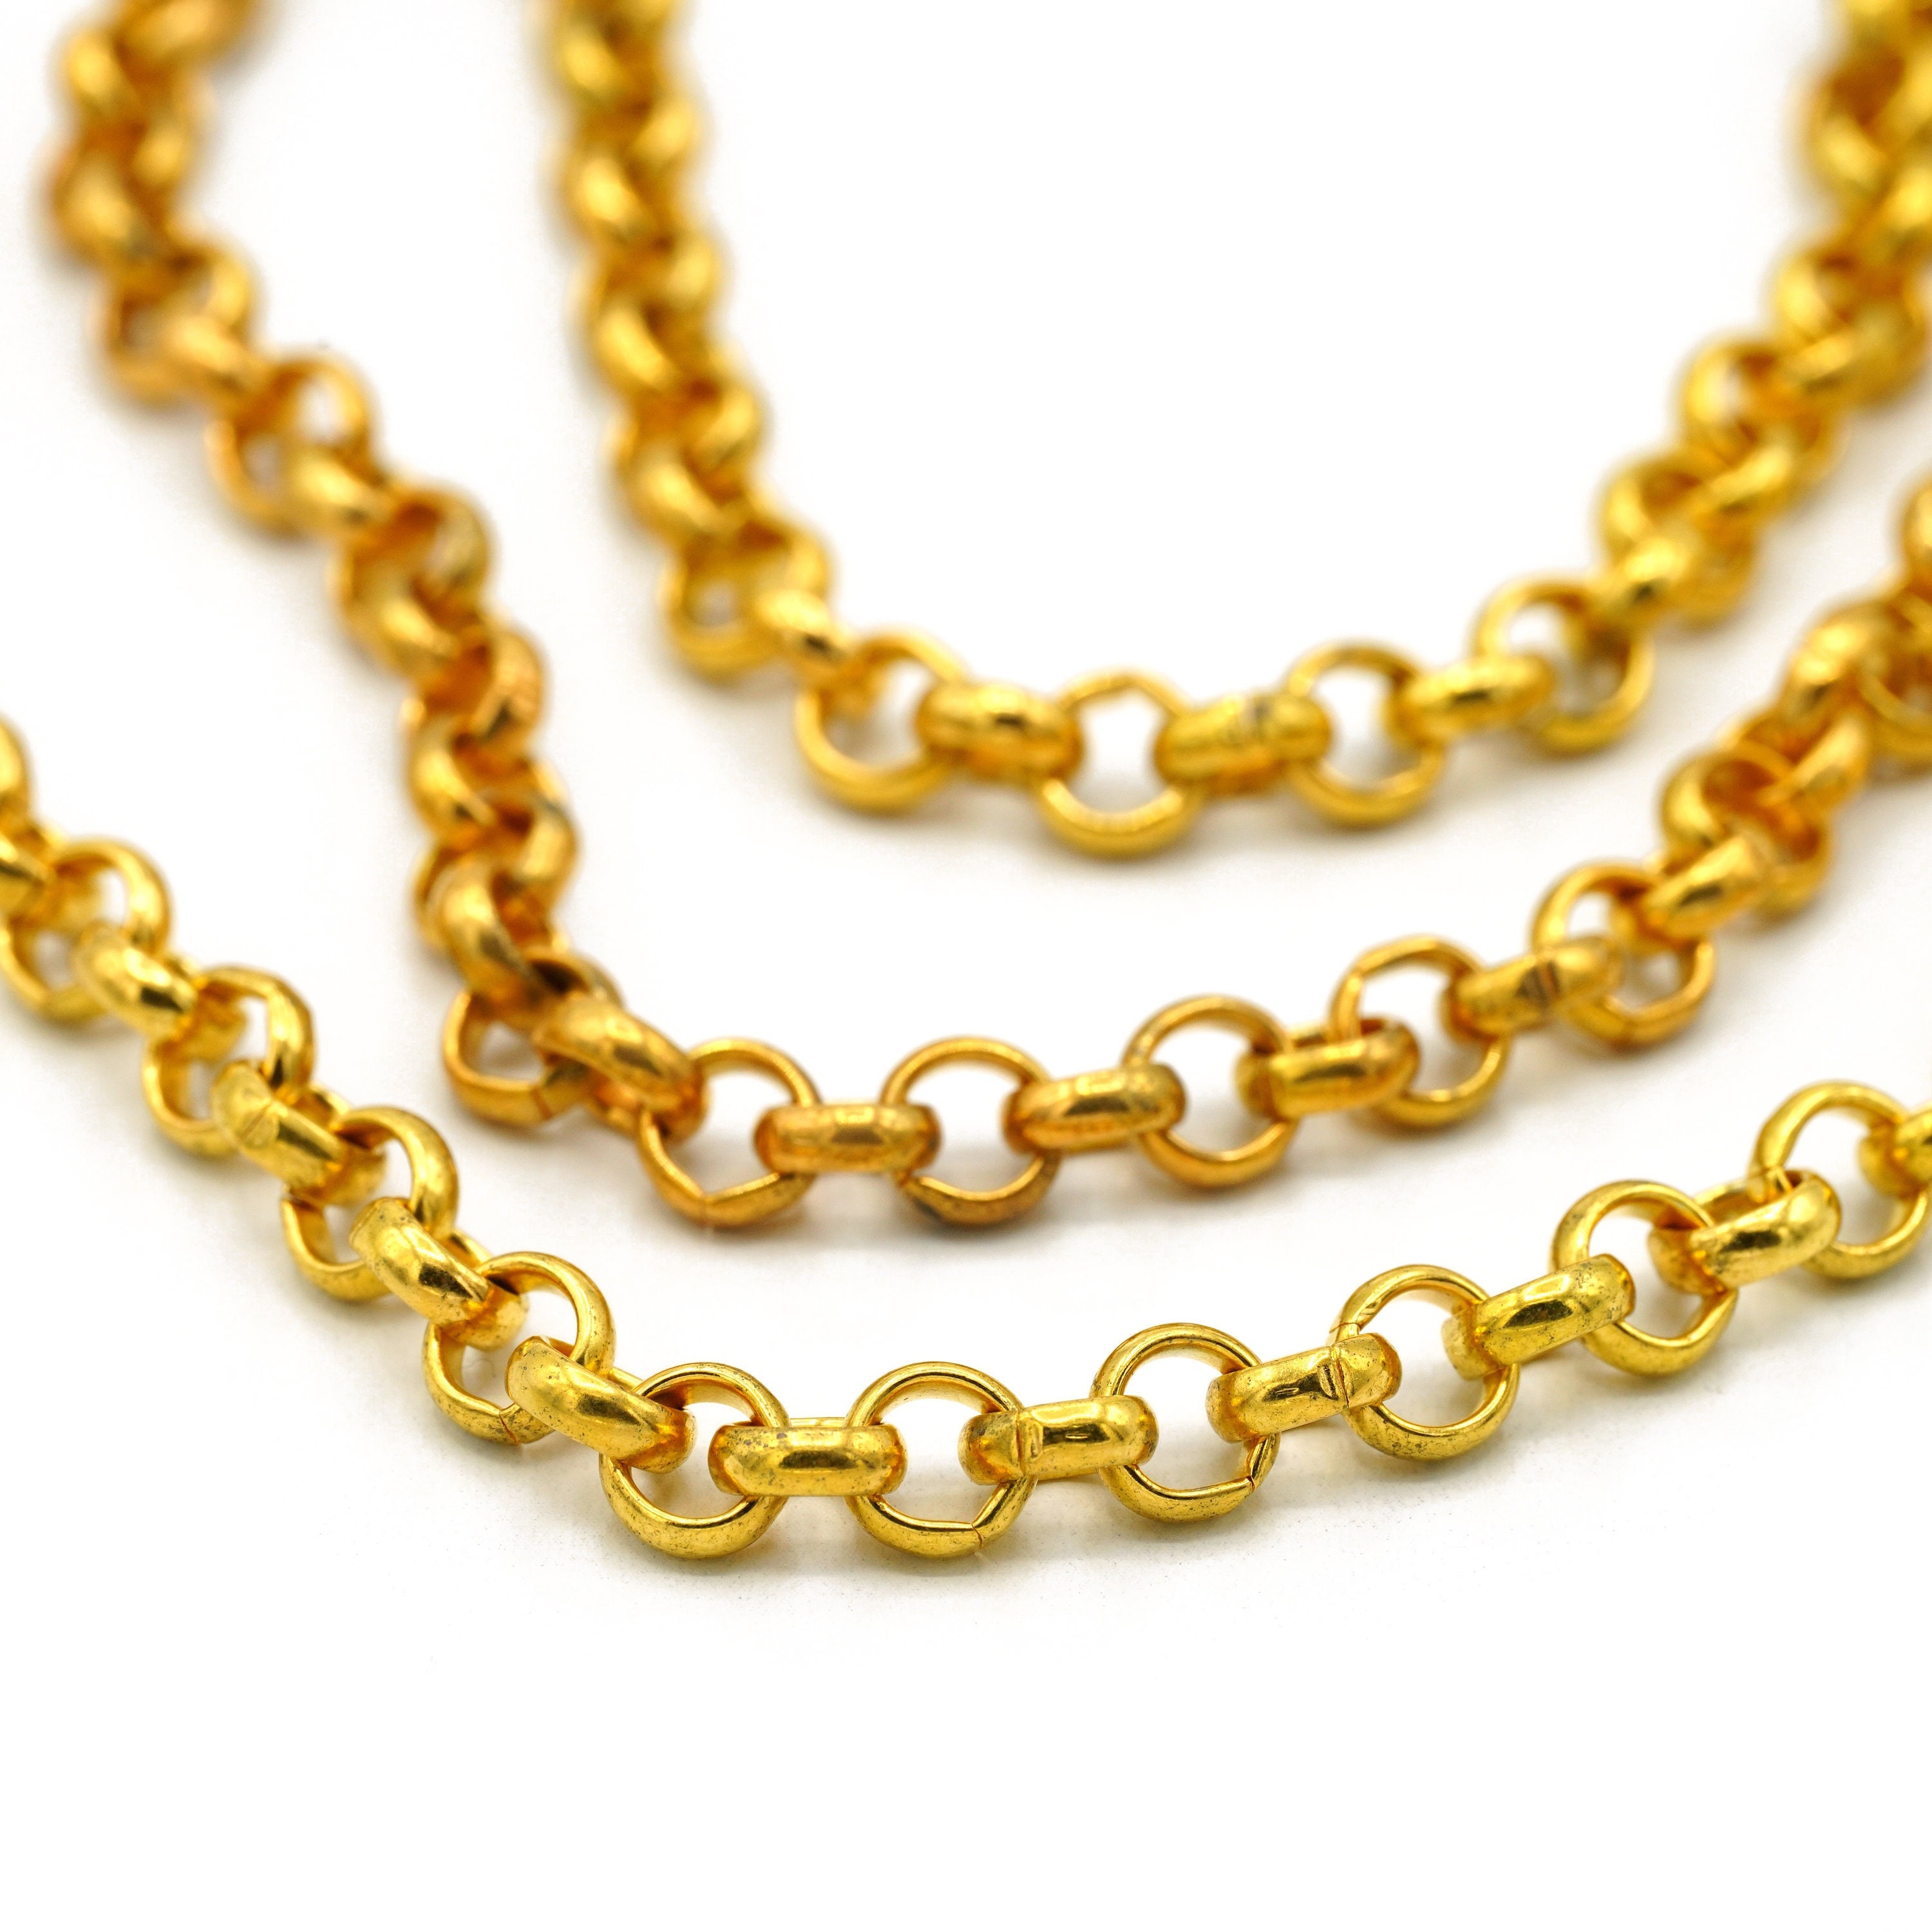 Aurate New York Large Gold Figaro Chain Necklace, Vermeil White Gold, Size 22in